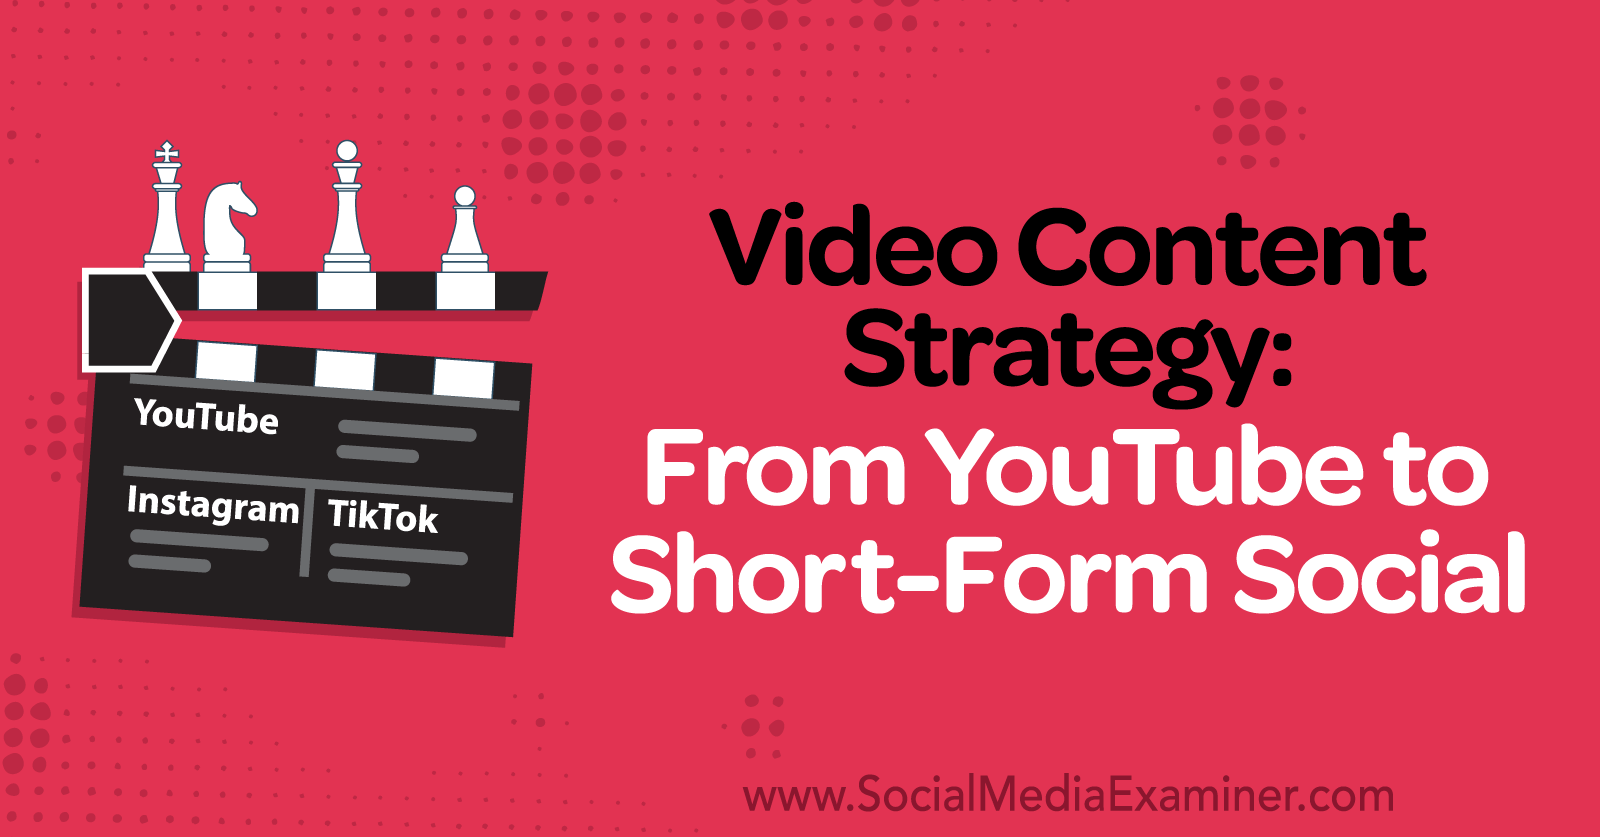 Video Content Strategy: From YouTube to Short-Form Social